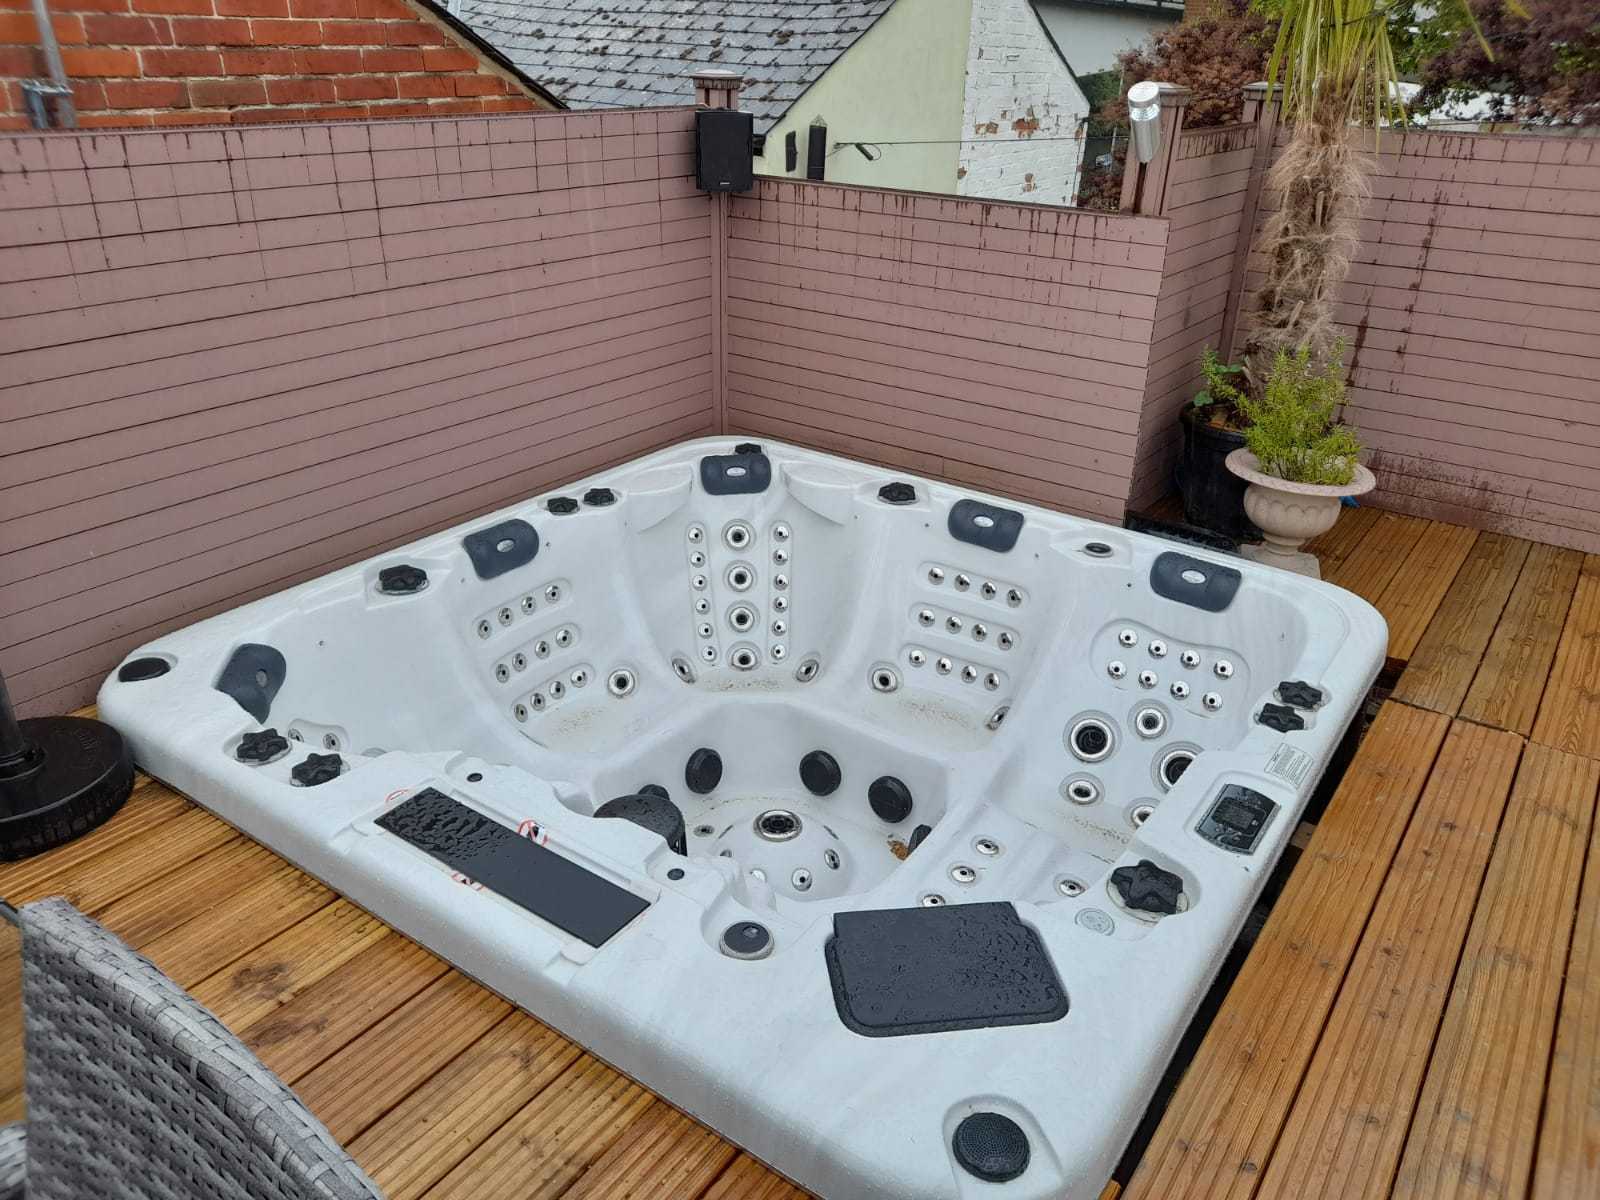 The jacuzzi, which has its own TVs